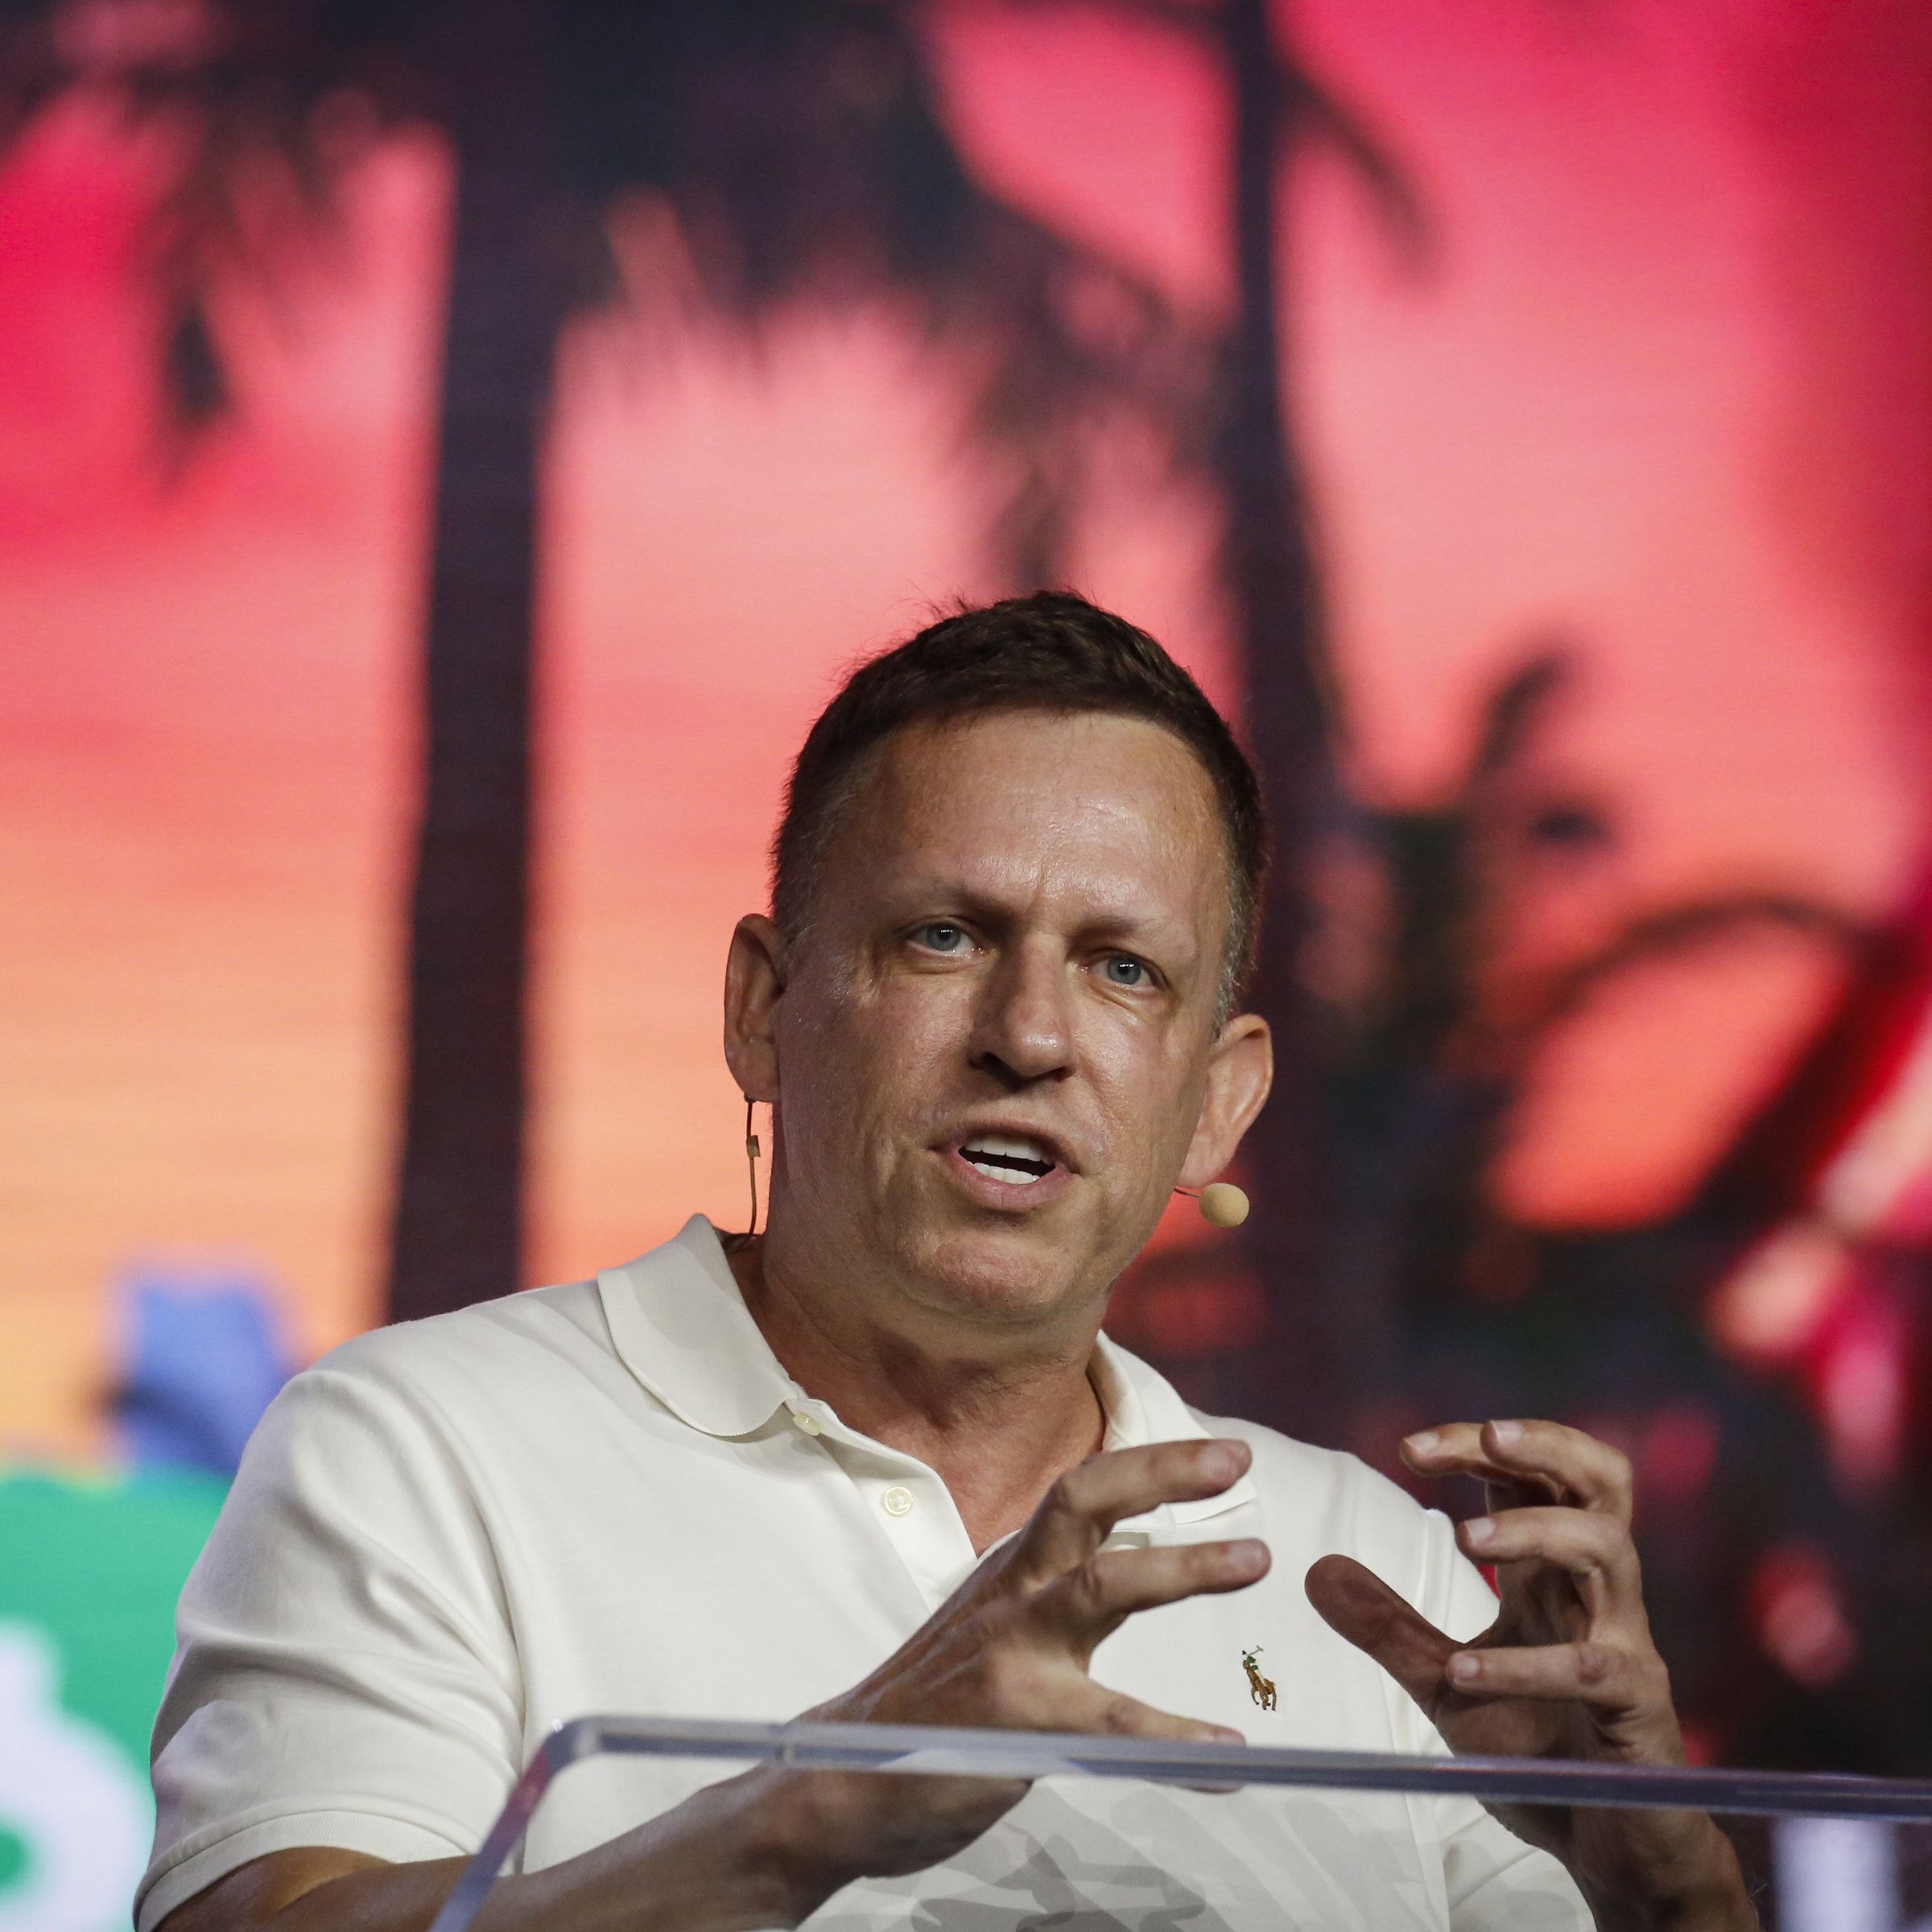 Peter Thiel at a Bitcoin conference